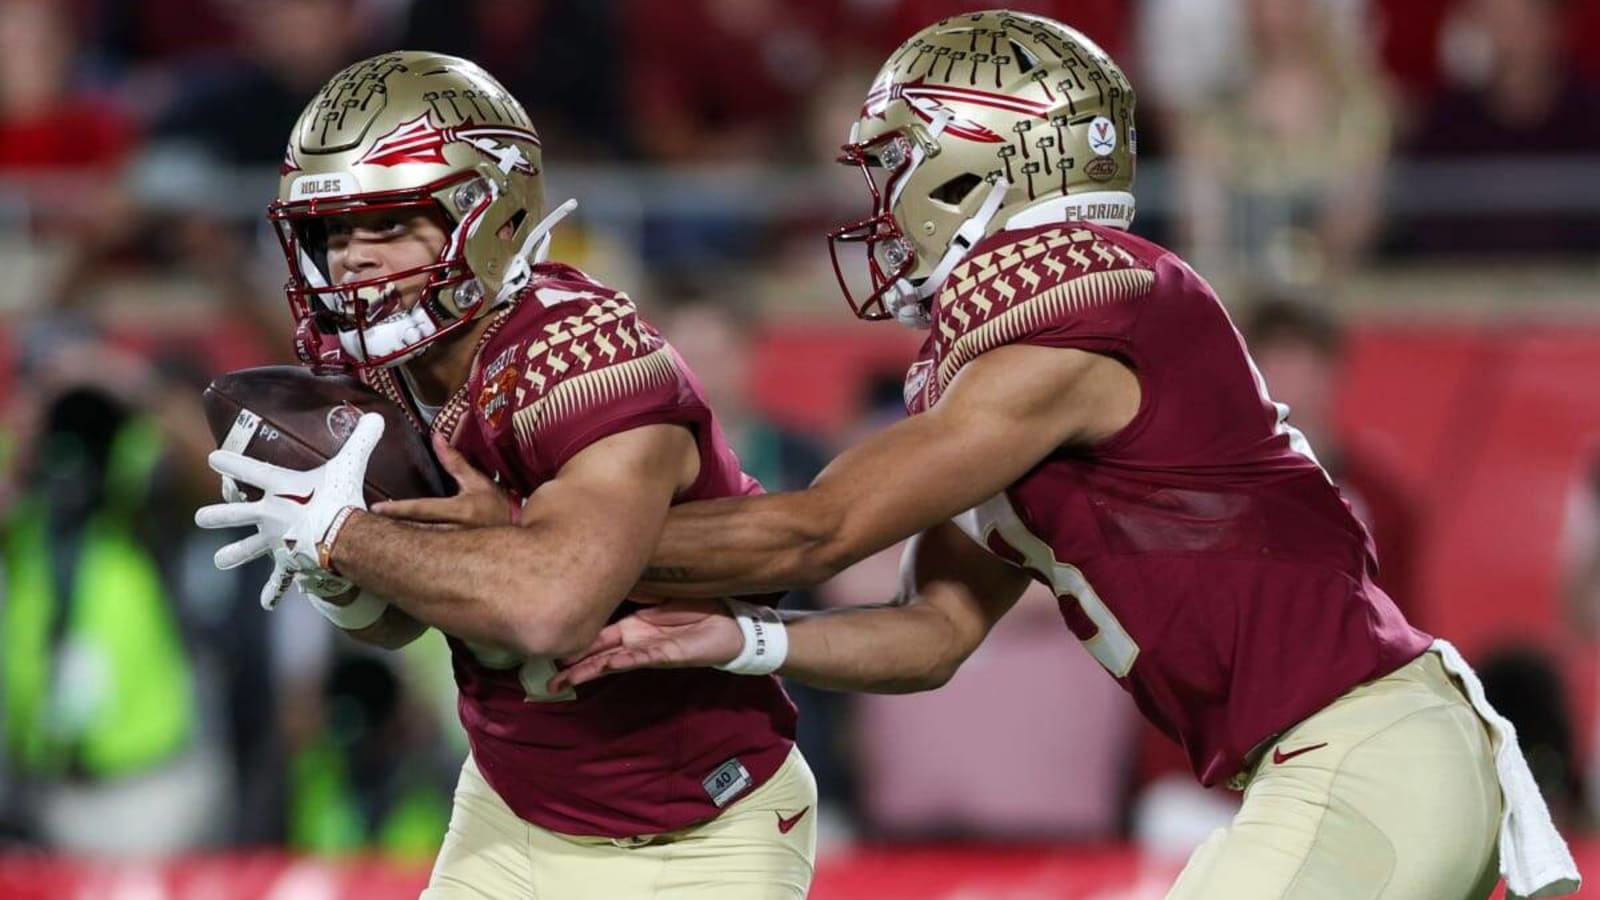 Florida State loses starting wide receiver for the foreseeable future following hip surgery